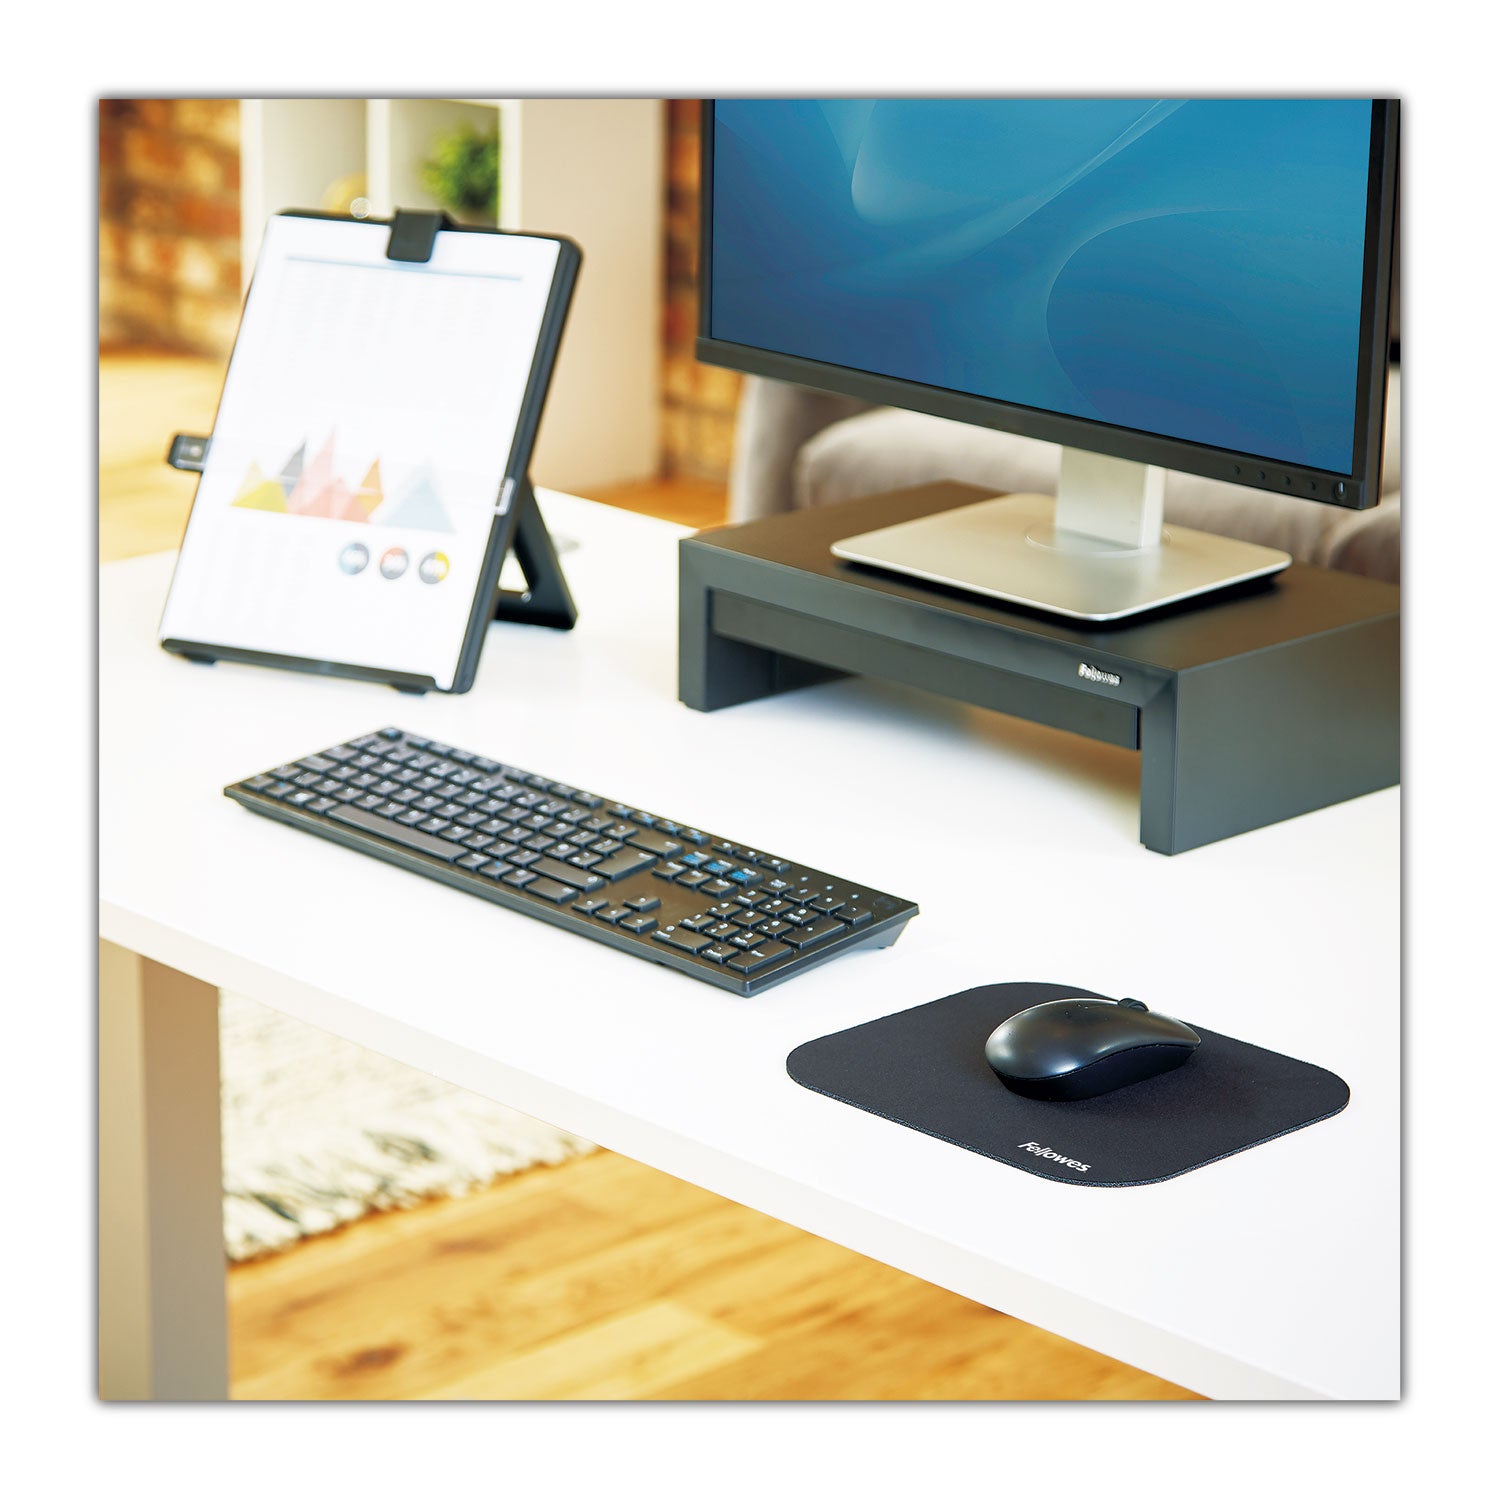 Polyester Mouse Pad, 9 x 8, Black - 